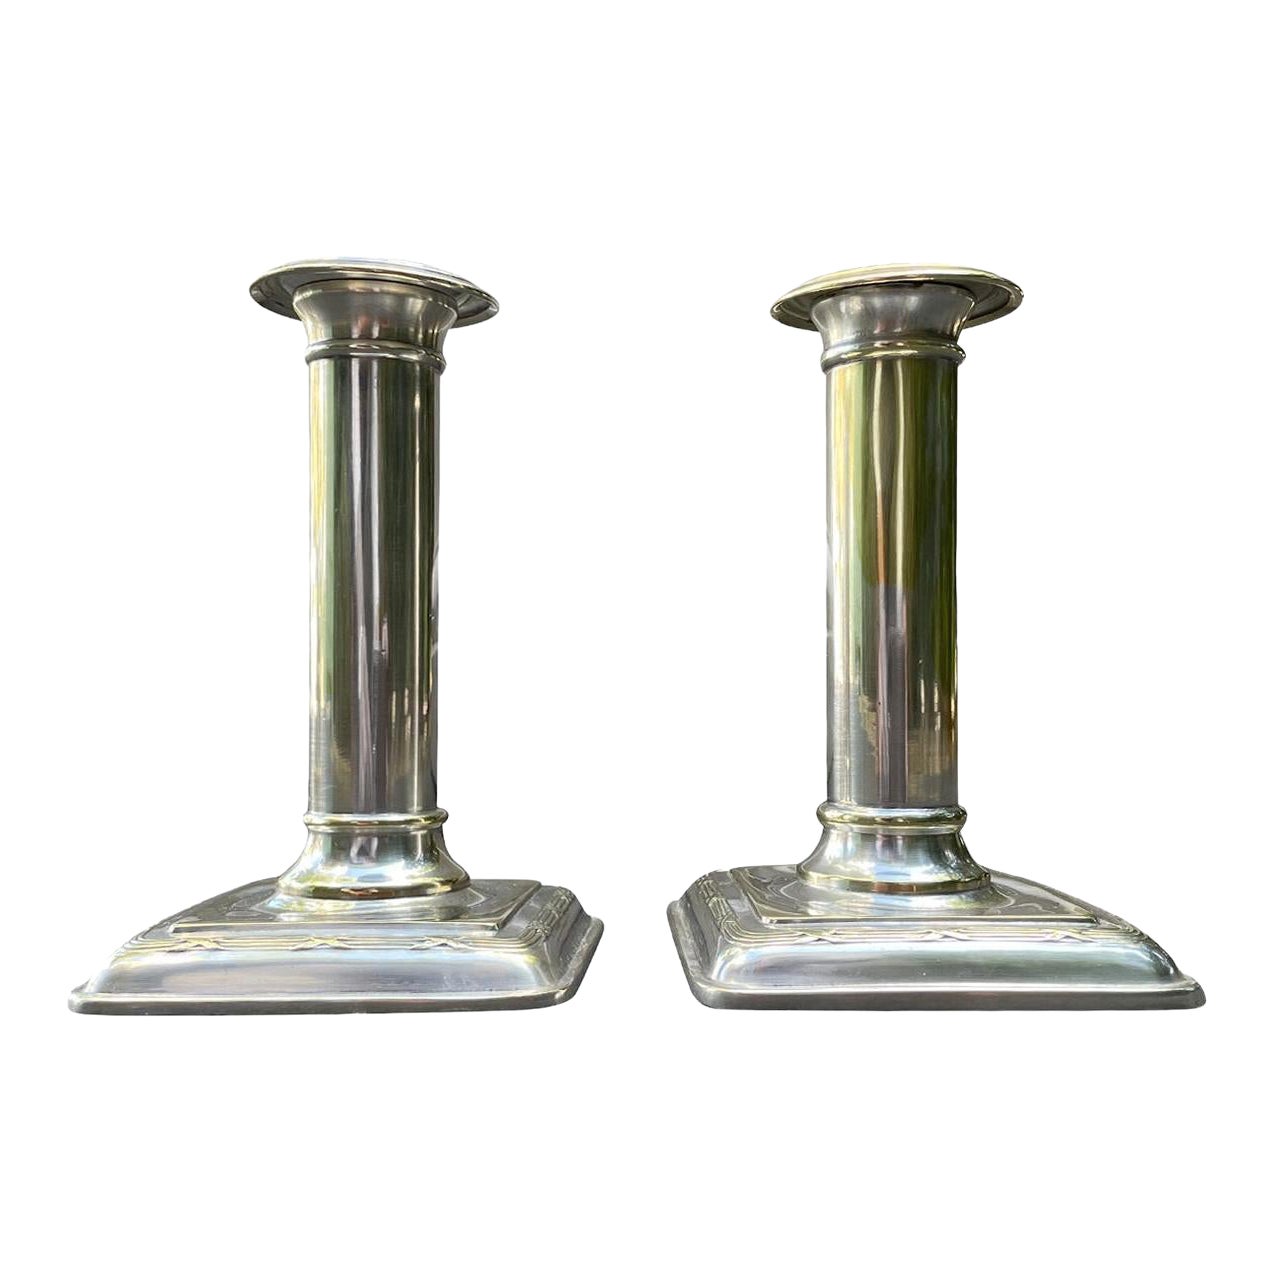 20th Century Swedish Pair of Nickel Silver Candlesticks, Holders by CG Hallberg For Sale